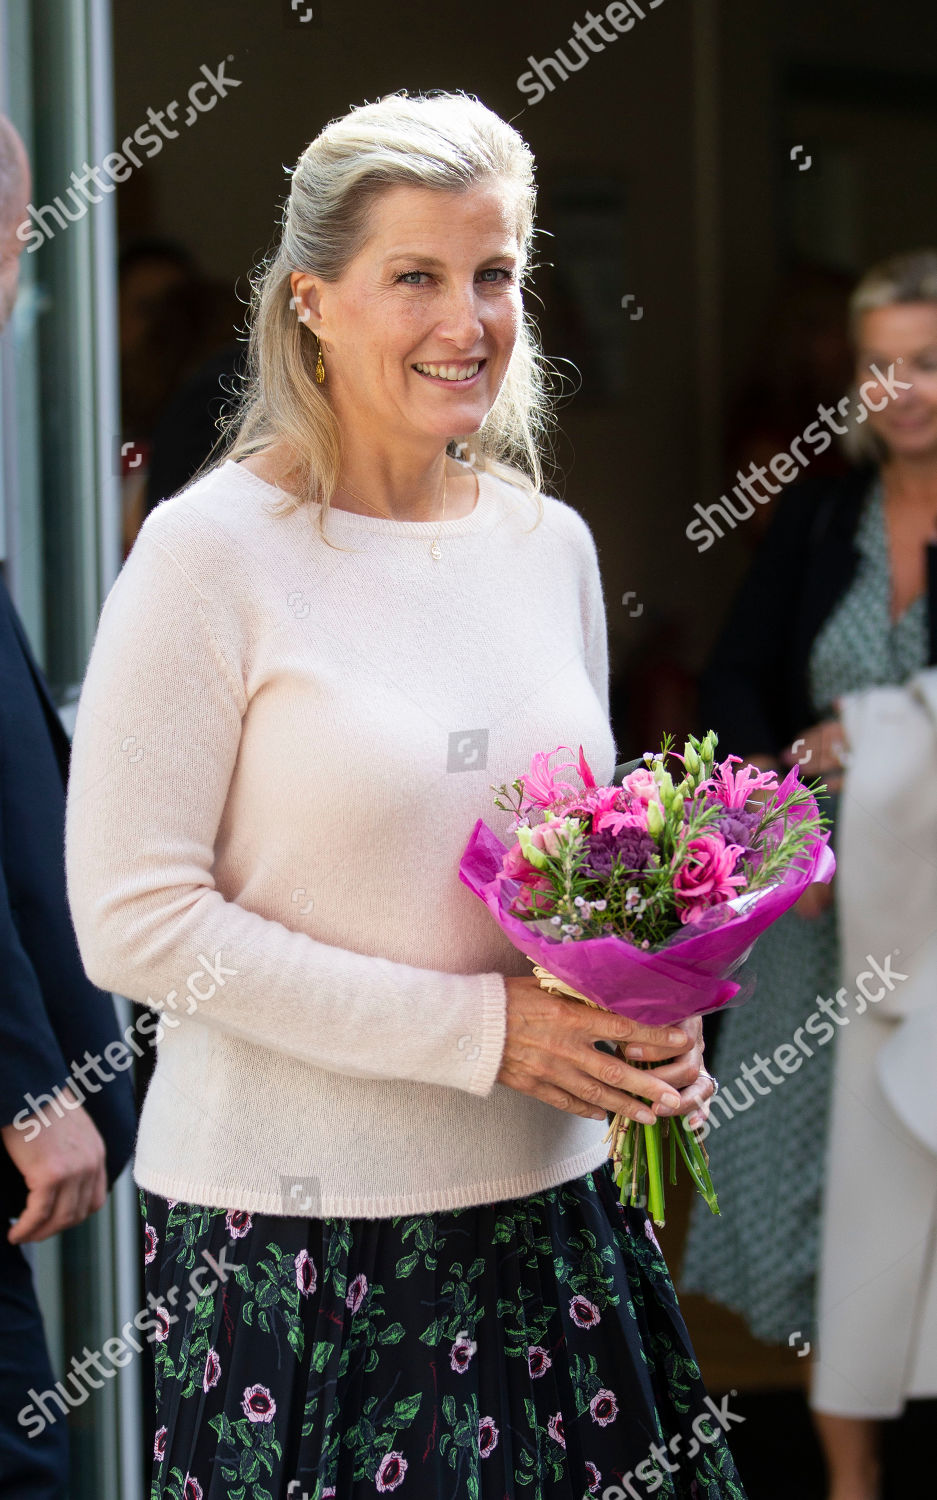 sophie-countess-of-wessex-visit-to-musgrove-park-hospital-taunton-somerset-uk-shutterstock-editorial-10422506aq.jpg